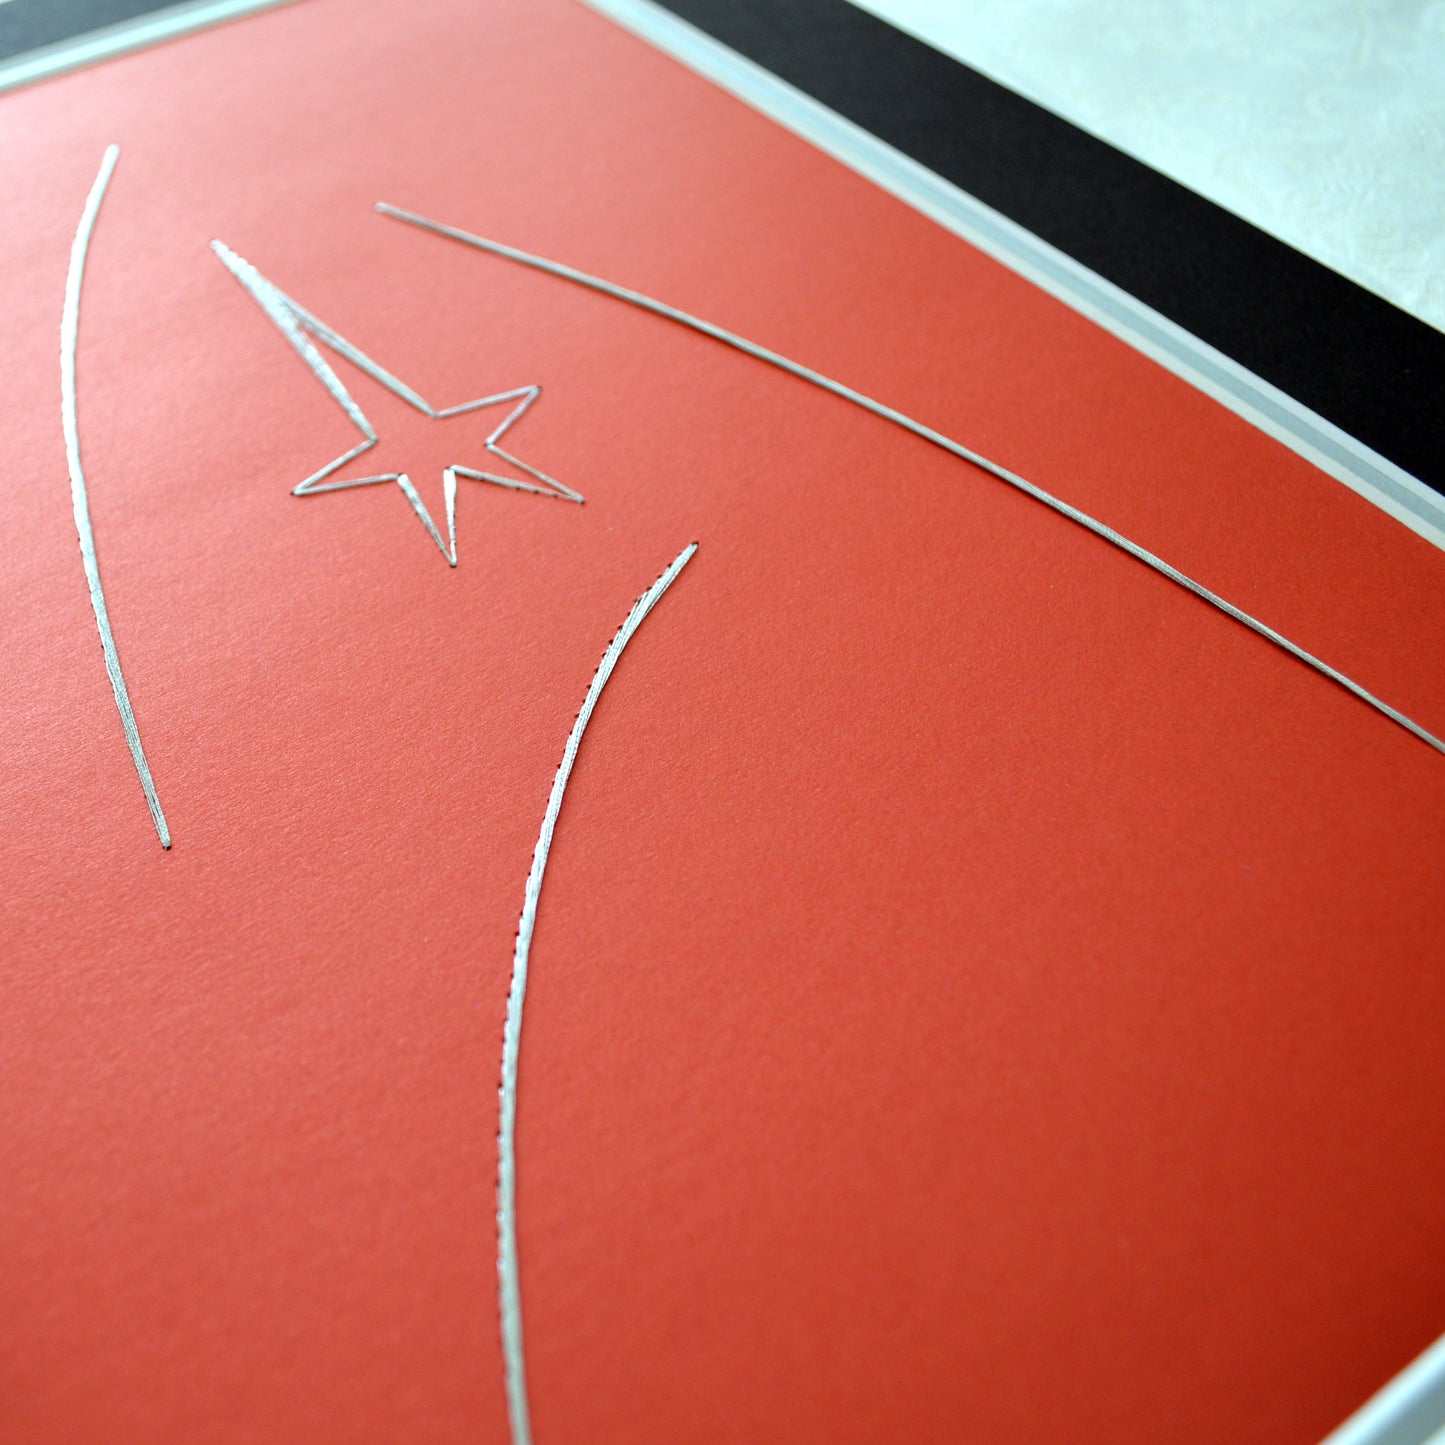 Star Trek Inspired Card Embroidery Kit (Red Shirt Card)